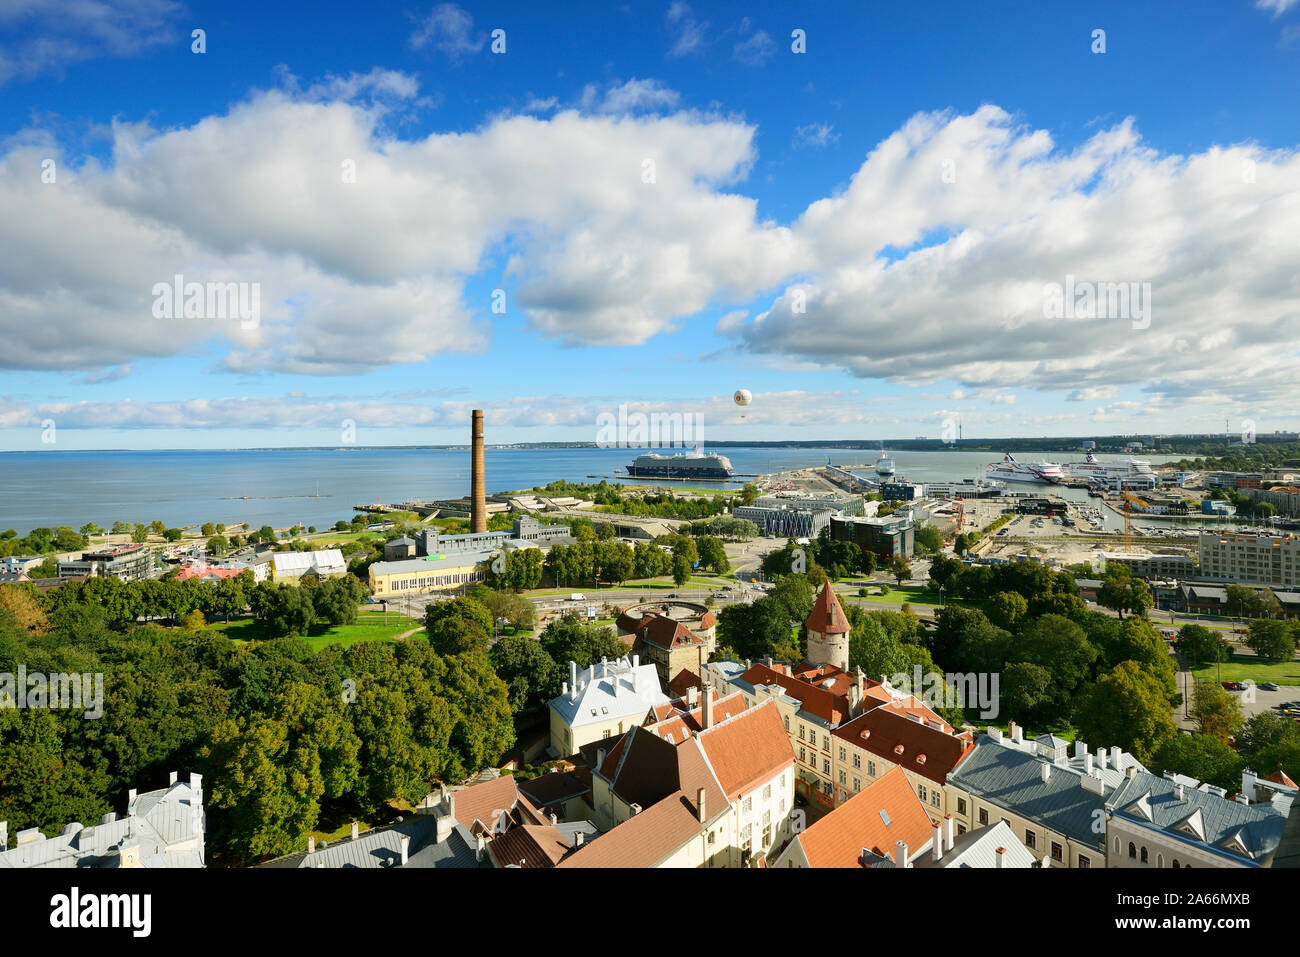 Tallinn's Old Town and a cruise ship at Linnahall Harbour in the background. Tallinn, Estonia Stock Photo